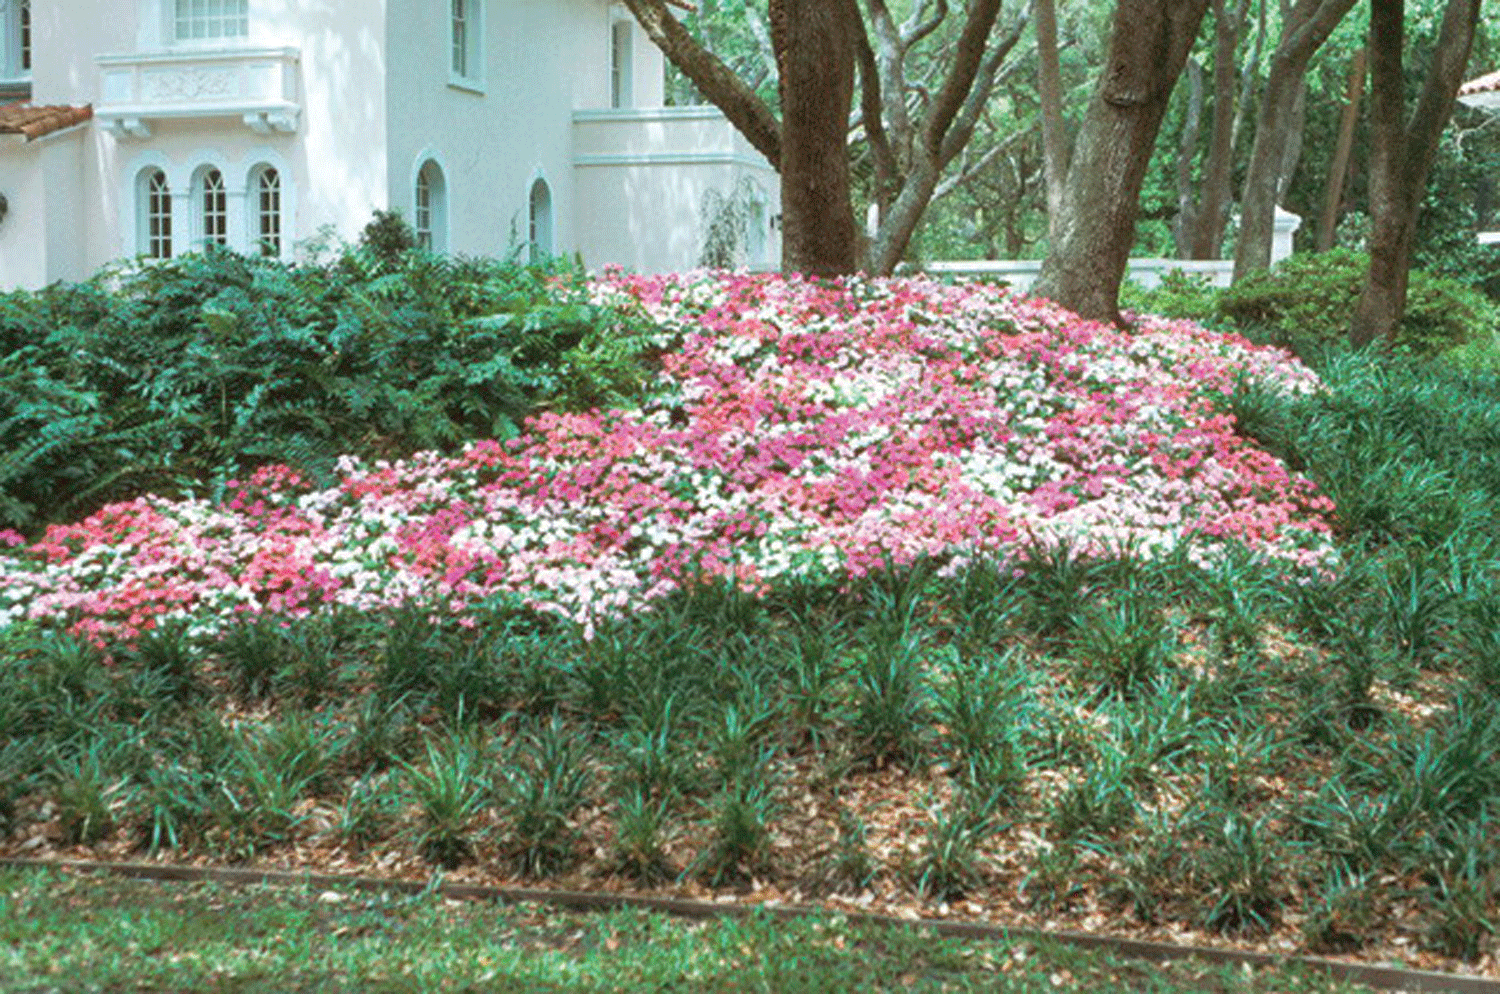 Raised bed planted with pink and white flowers